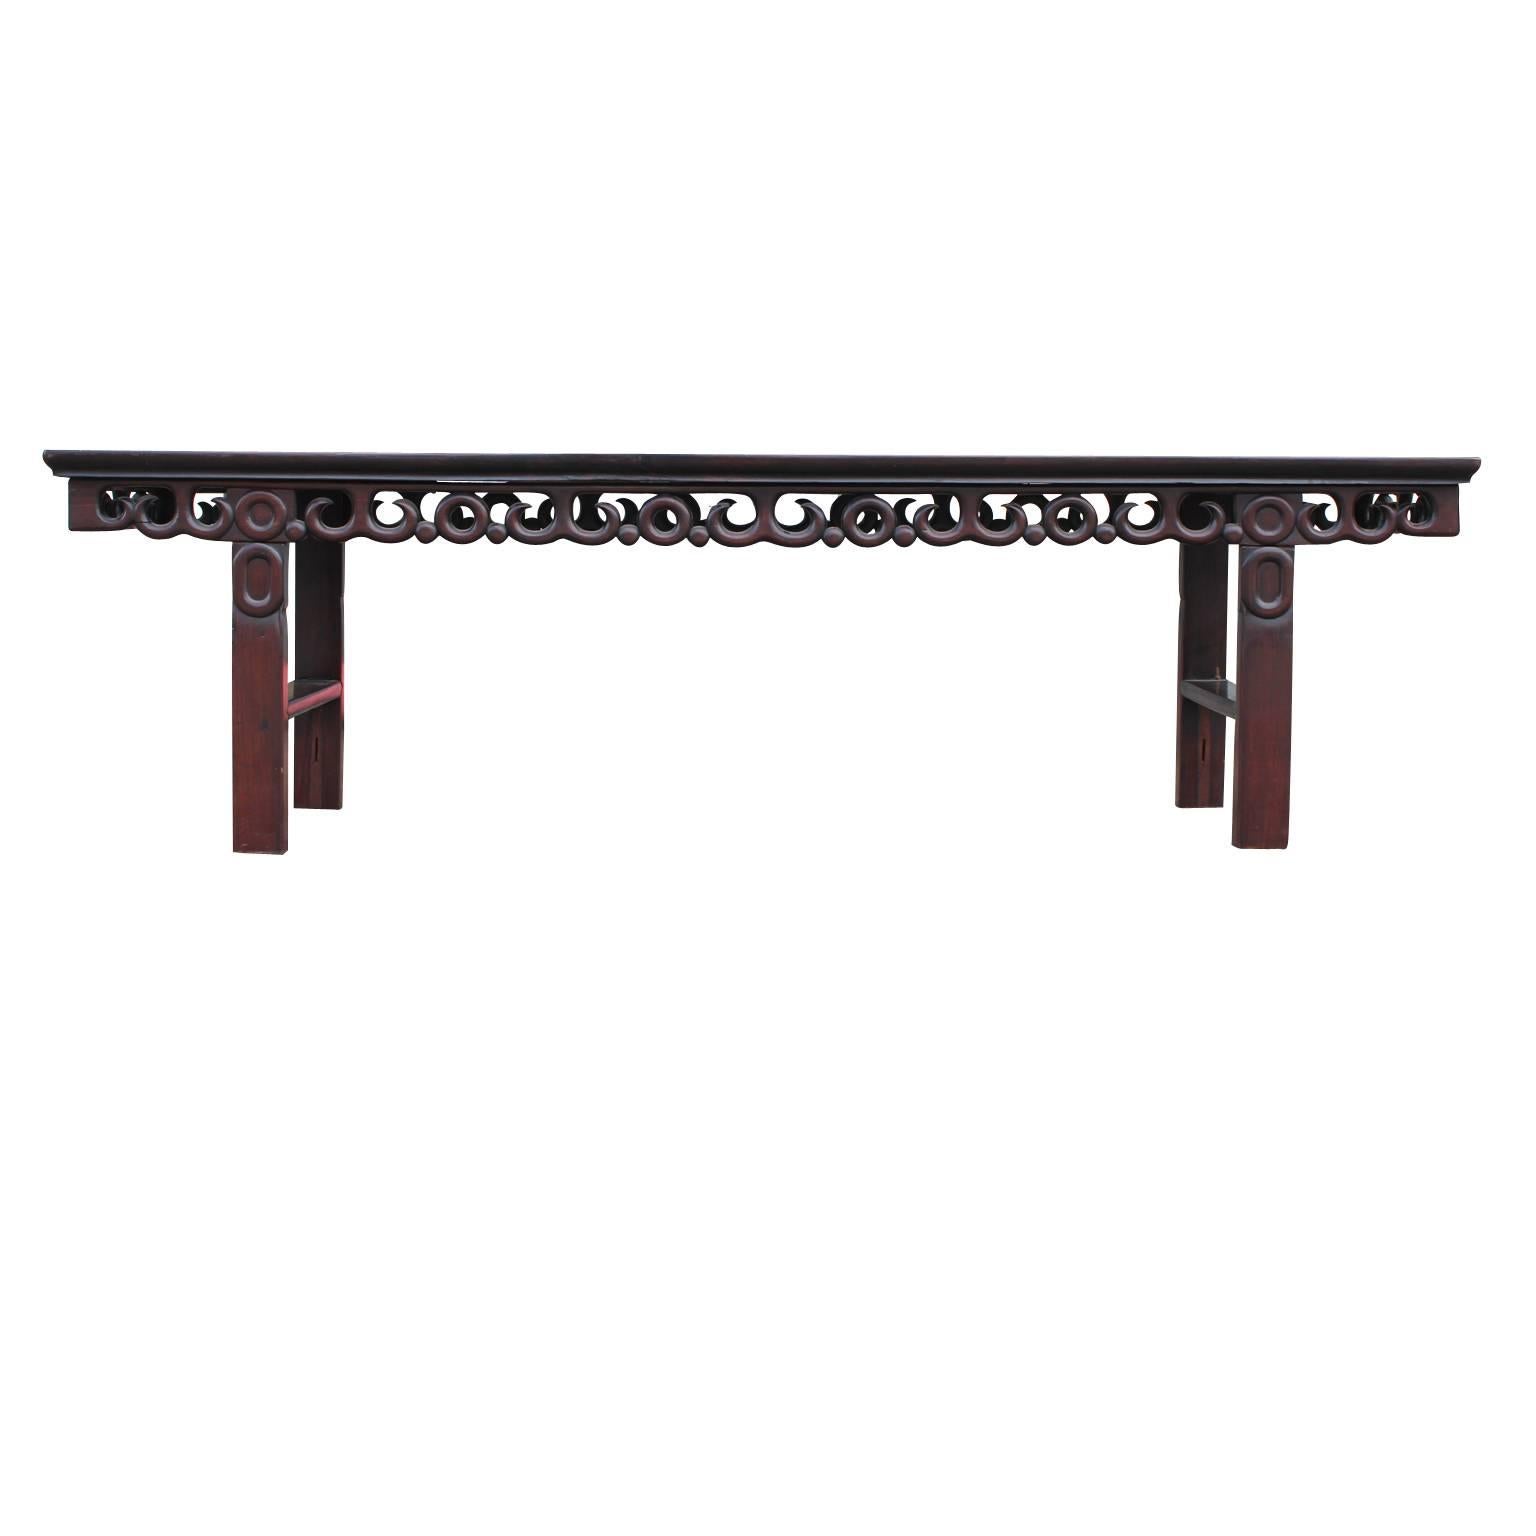 Gorgeous Chinese bench or console table. Made out of solid wood very heavy.